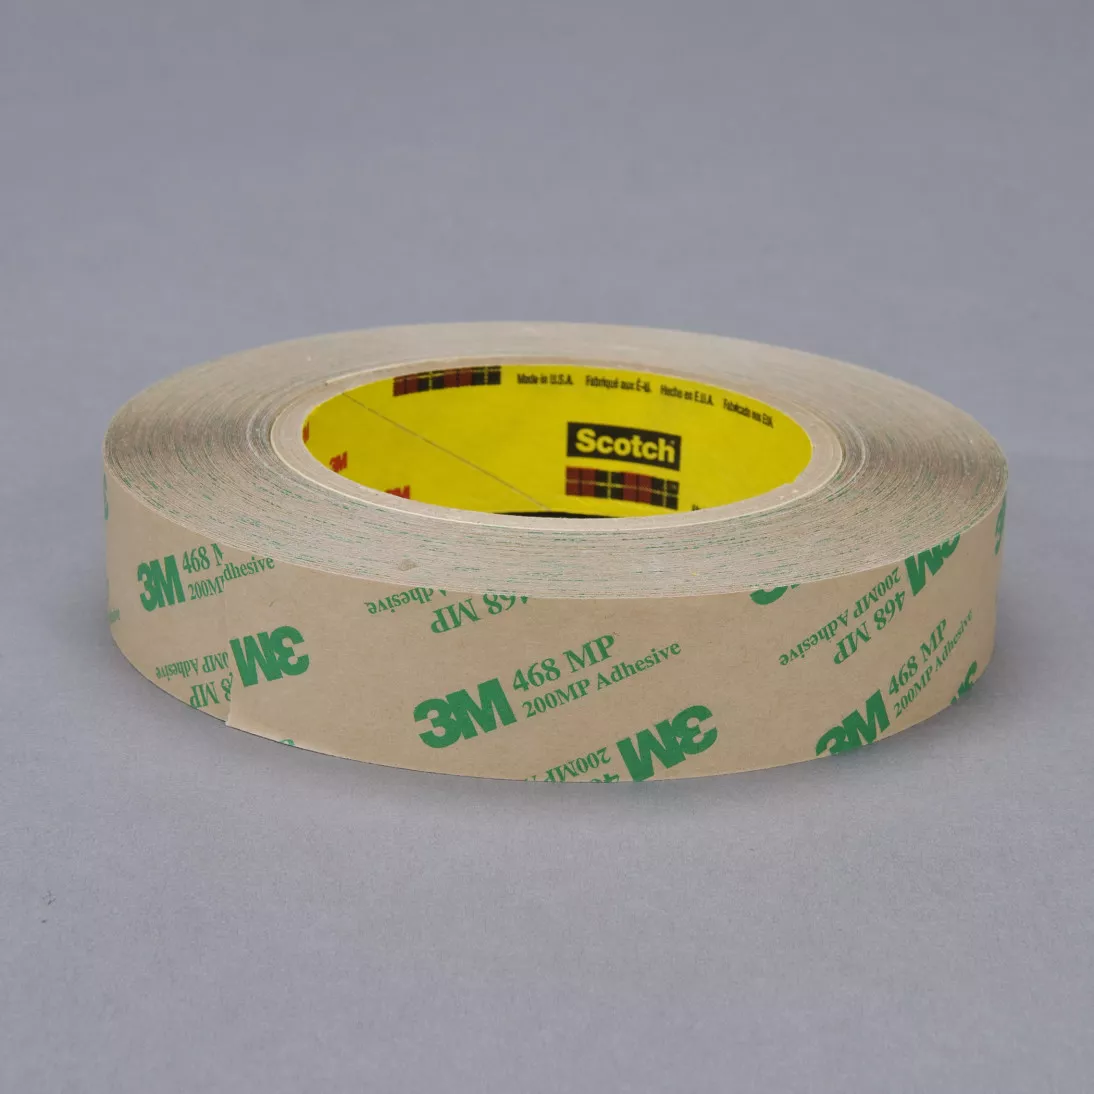 3M™ Adhesive Transfer Tape 468MP, Clear, 9 3/4 in x 180 yd, 5 mil, 1
roll per case